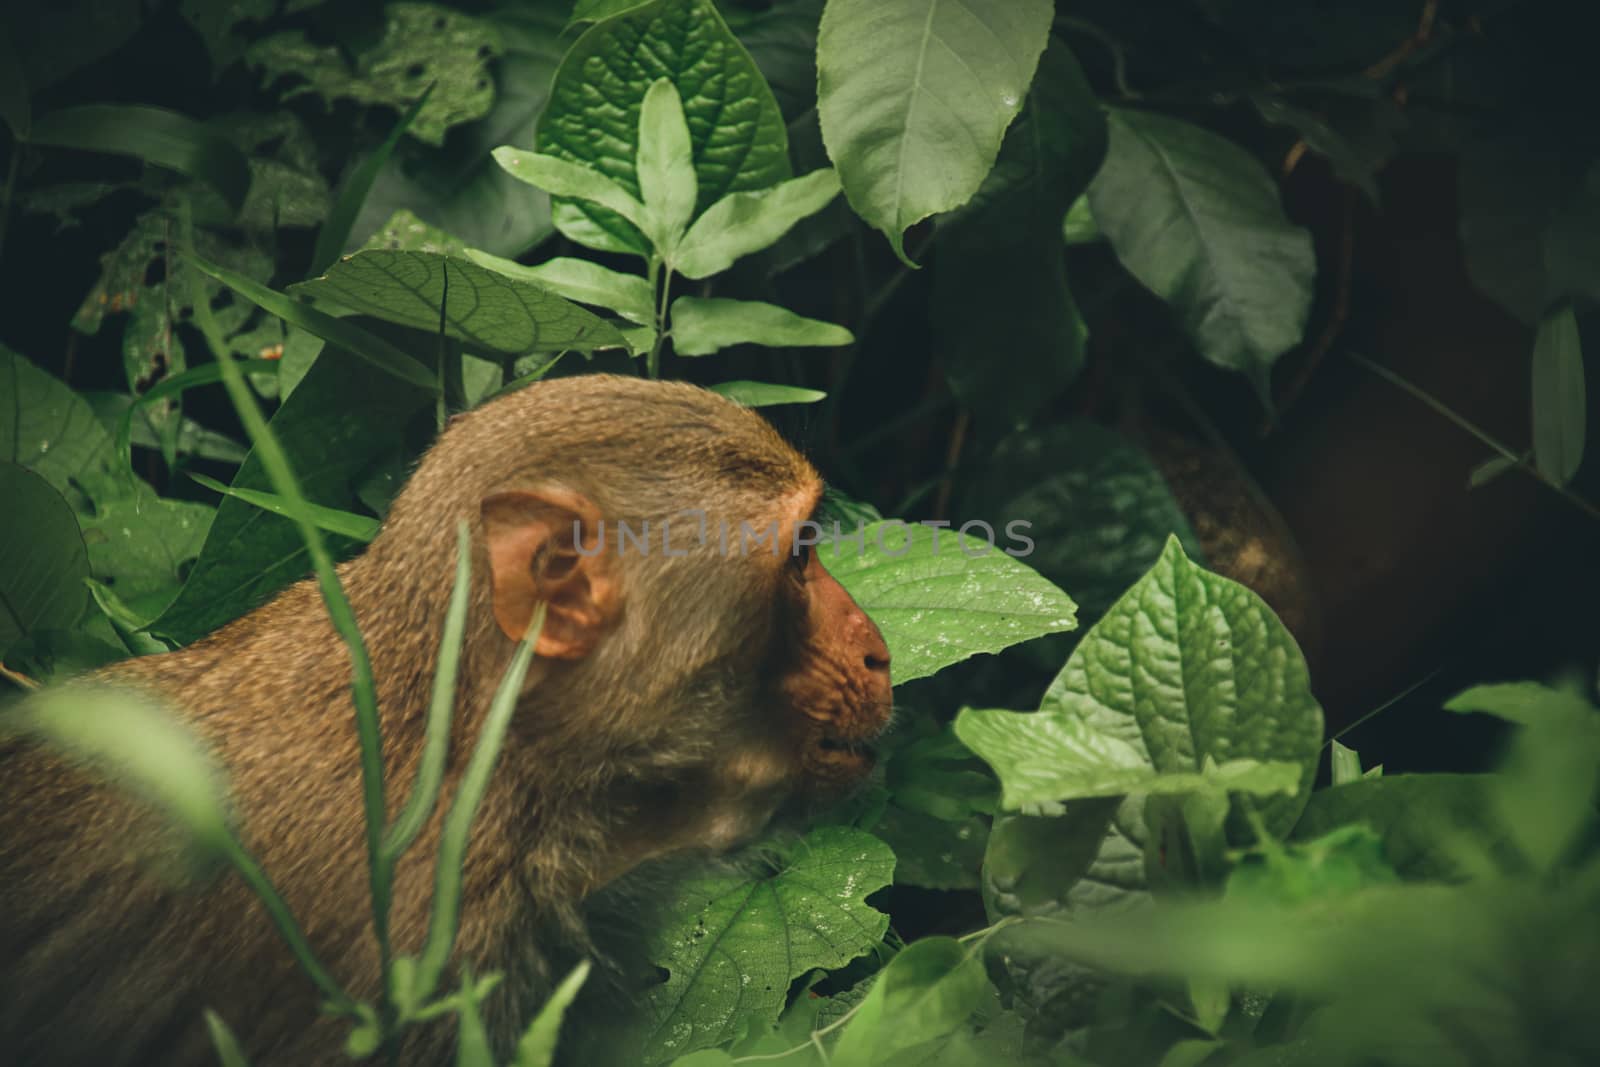 A Northern pig-tailed macaque (Macaca leonina) hiding among the dark foliage in cuc Phuong National Park in Vietnam